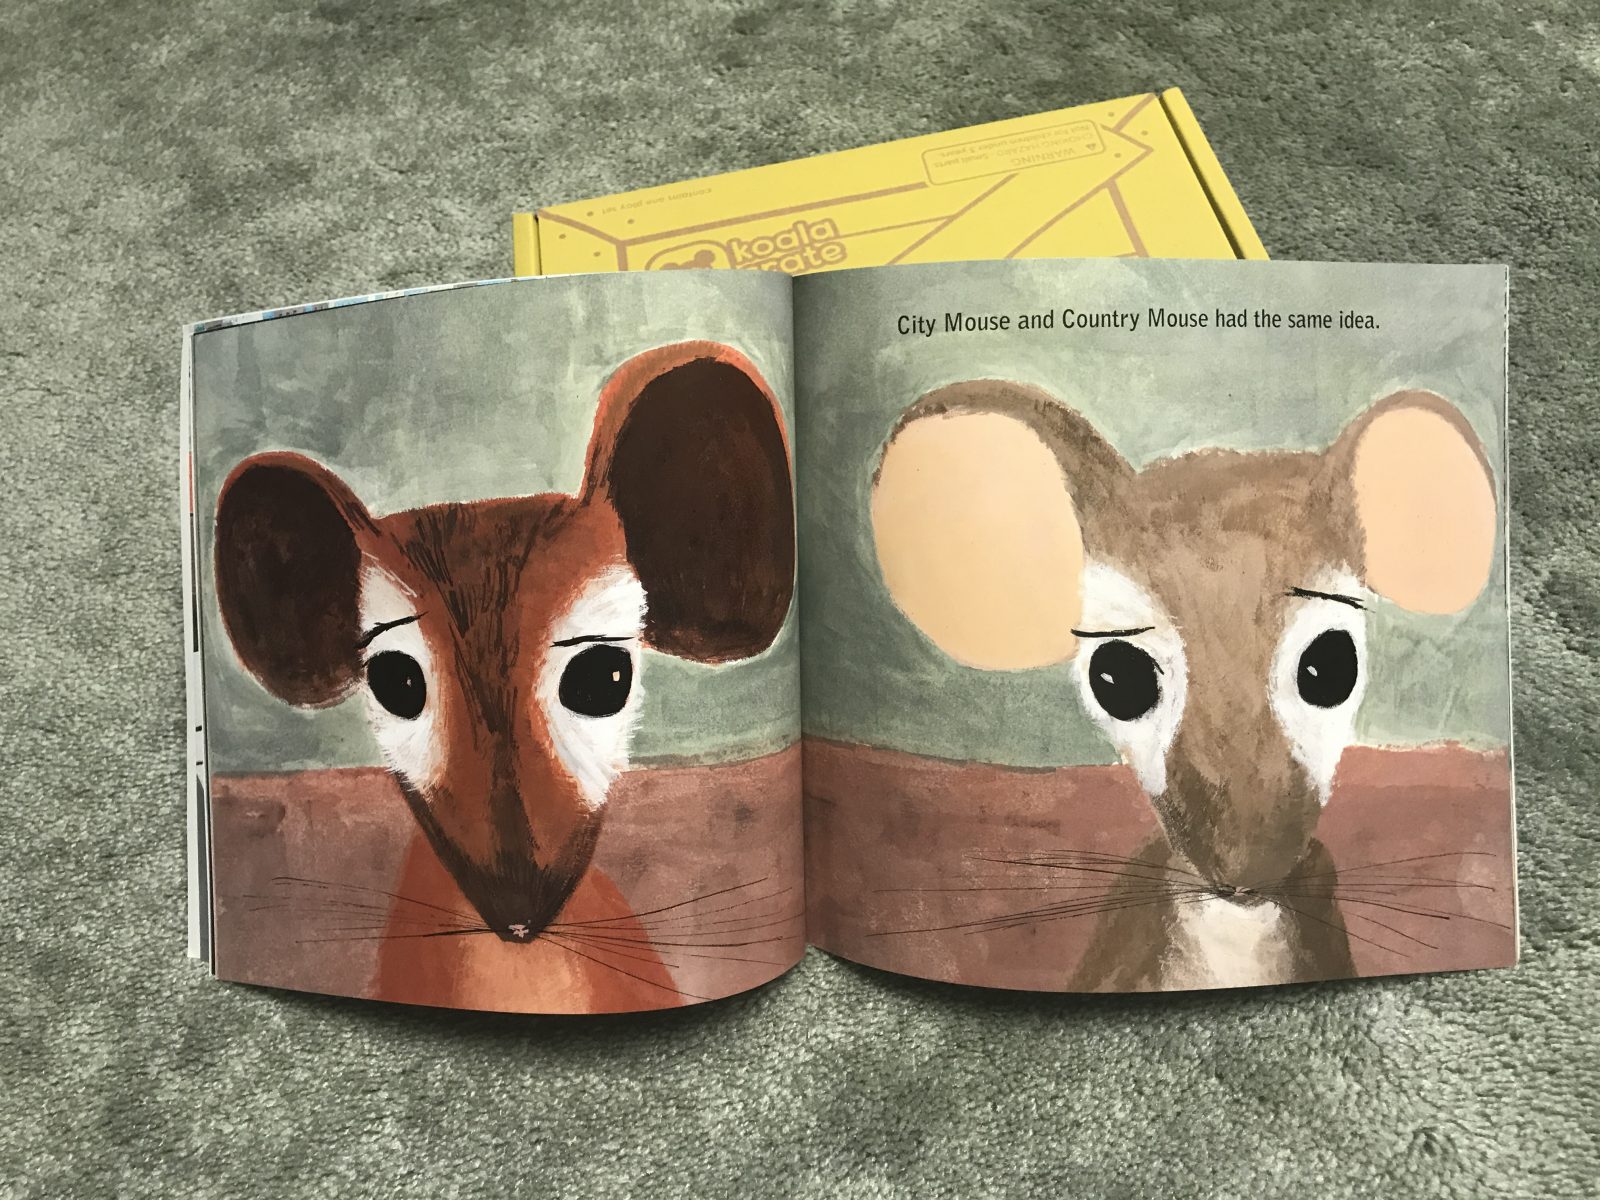 Mousetropolis book from the Deluxe upgrade - Koala Crate